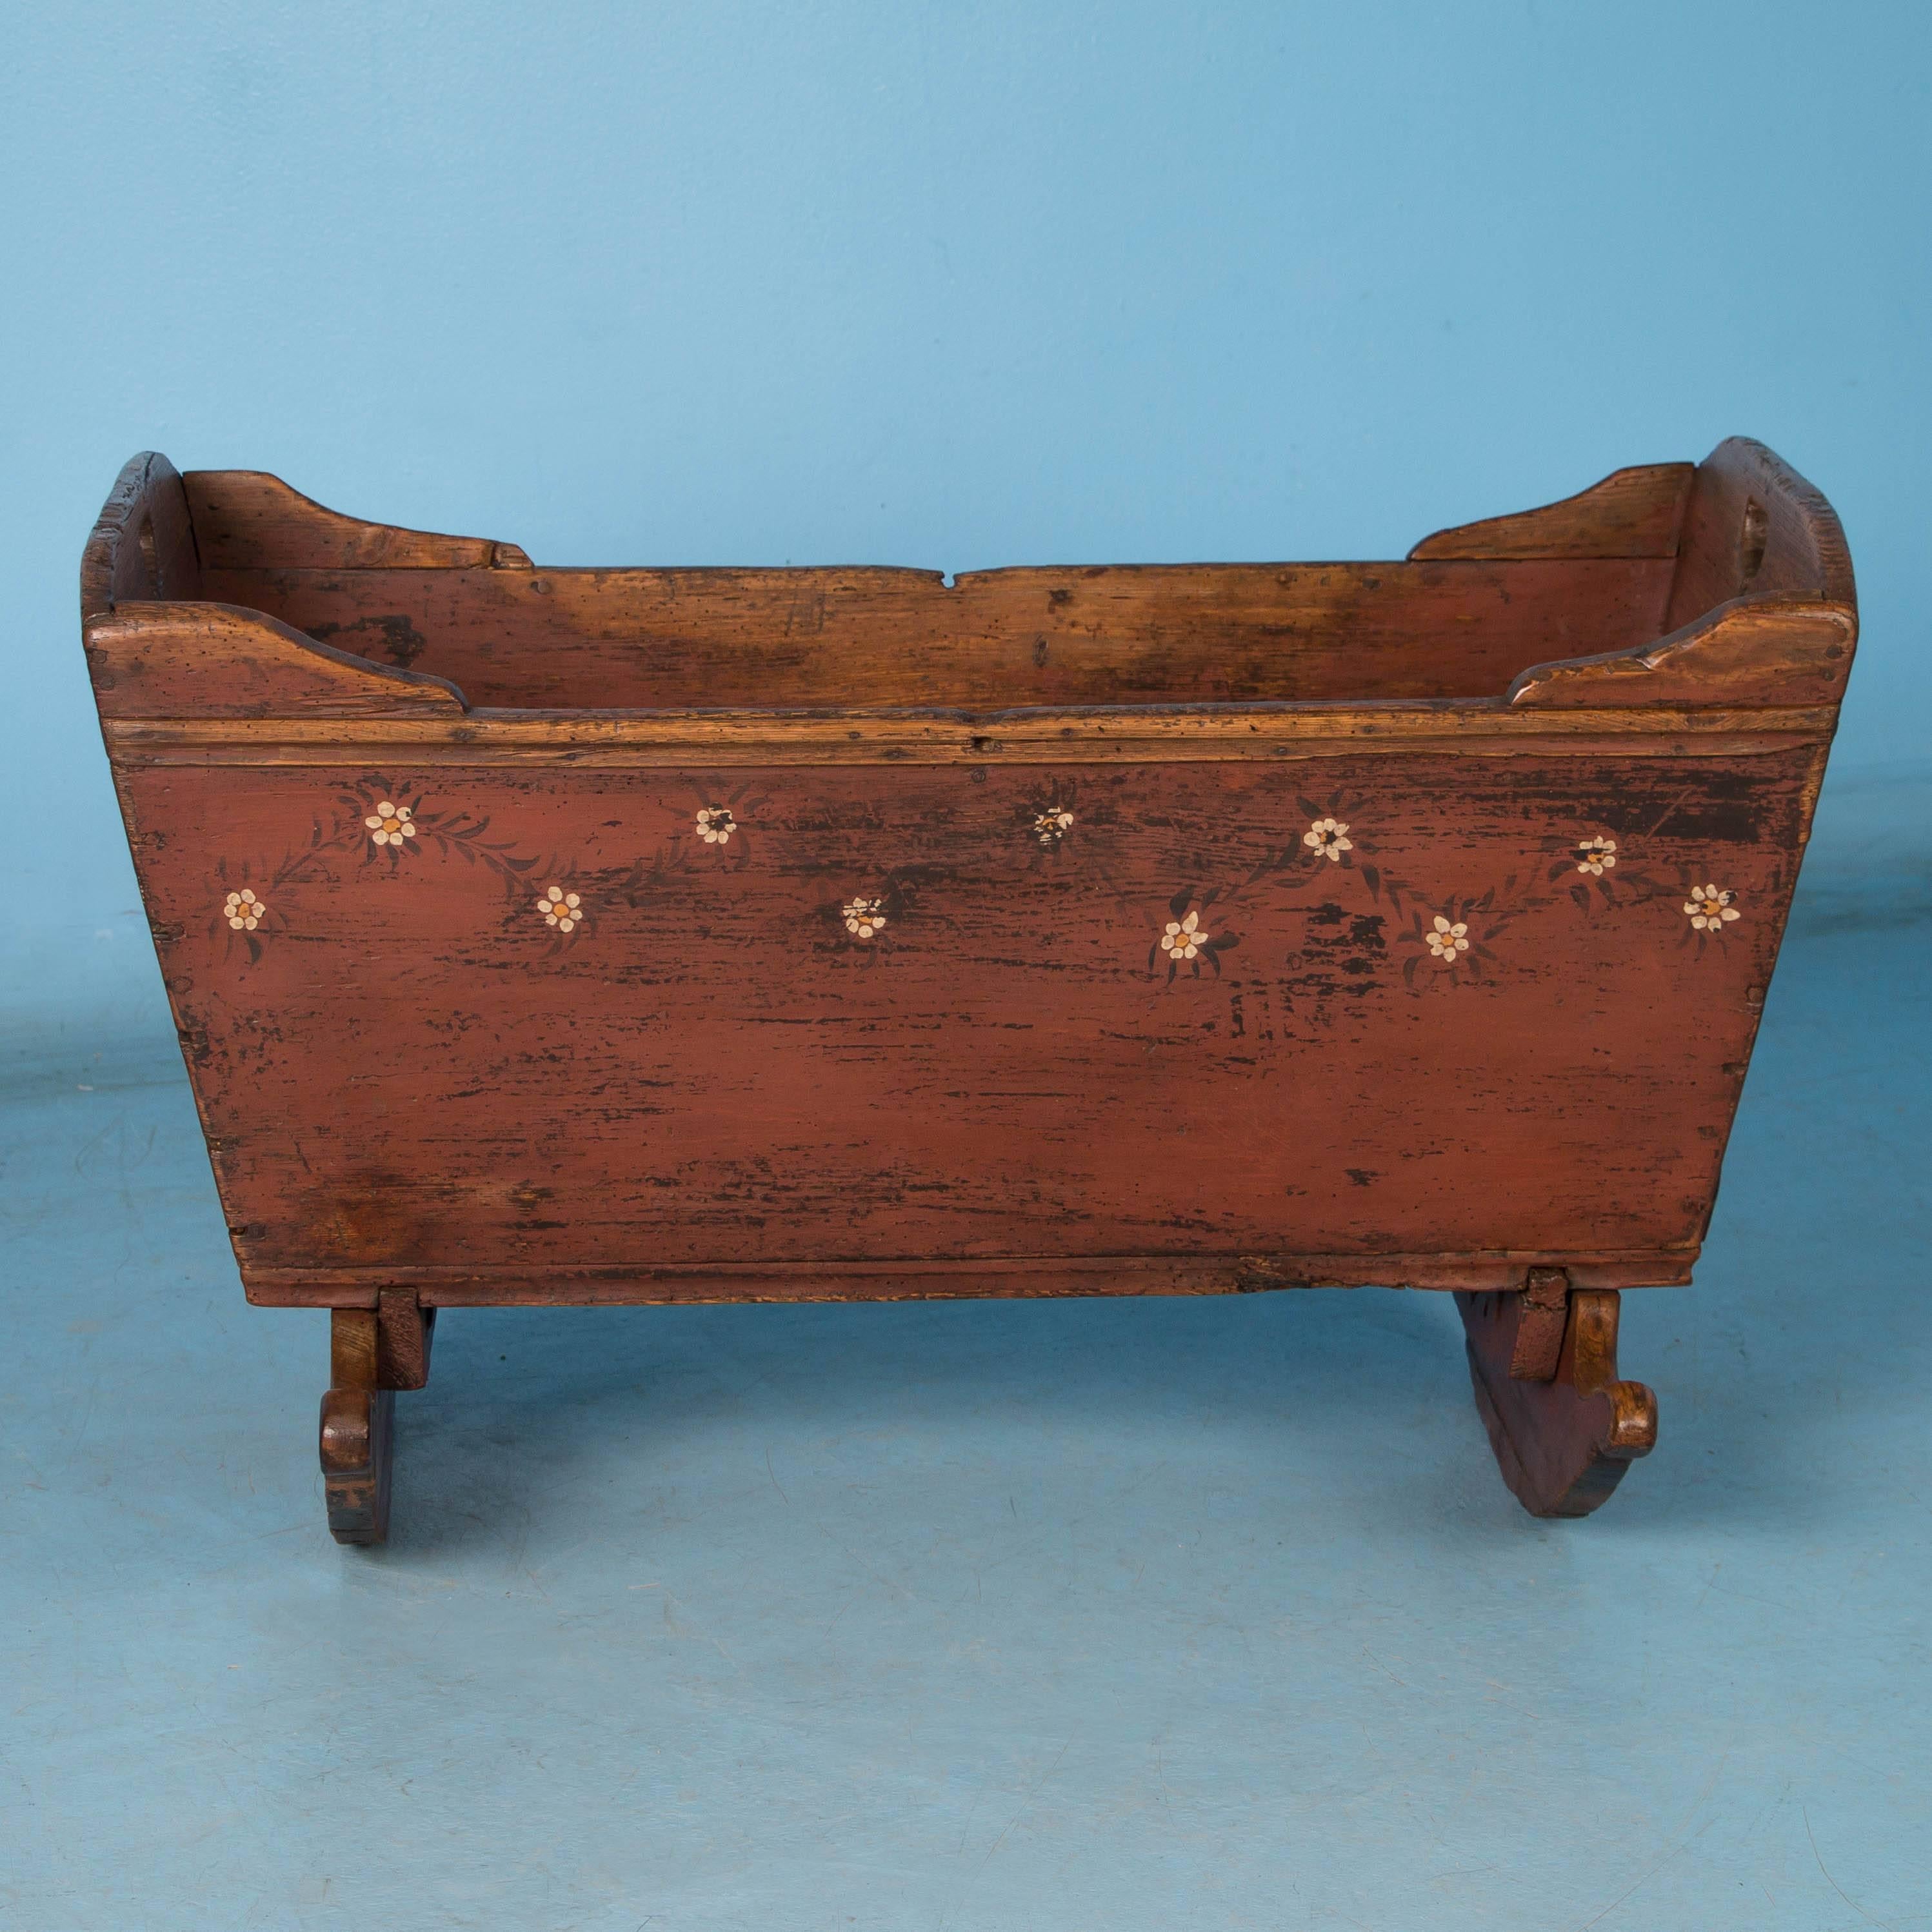 This charming 19th century cradle with the original warm, rust colored paint is visually outstanding. The white floral design, monogram and date of 1852 add to the Folk Art quality and most appealing is where the paint is worn away from years of use